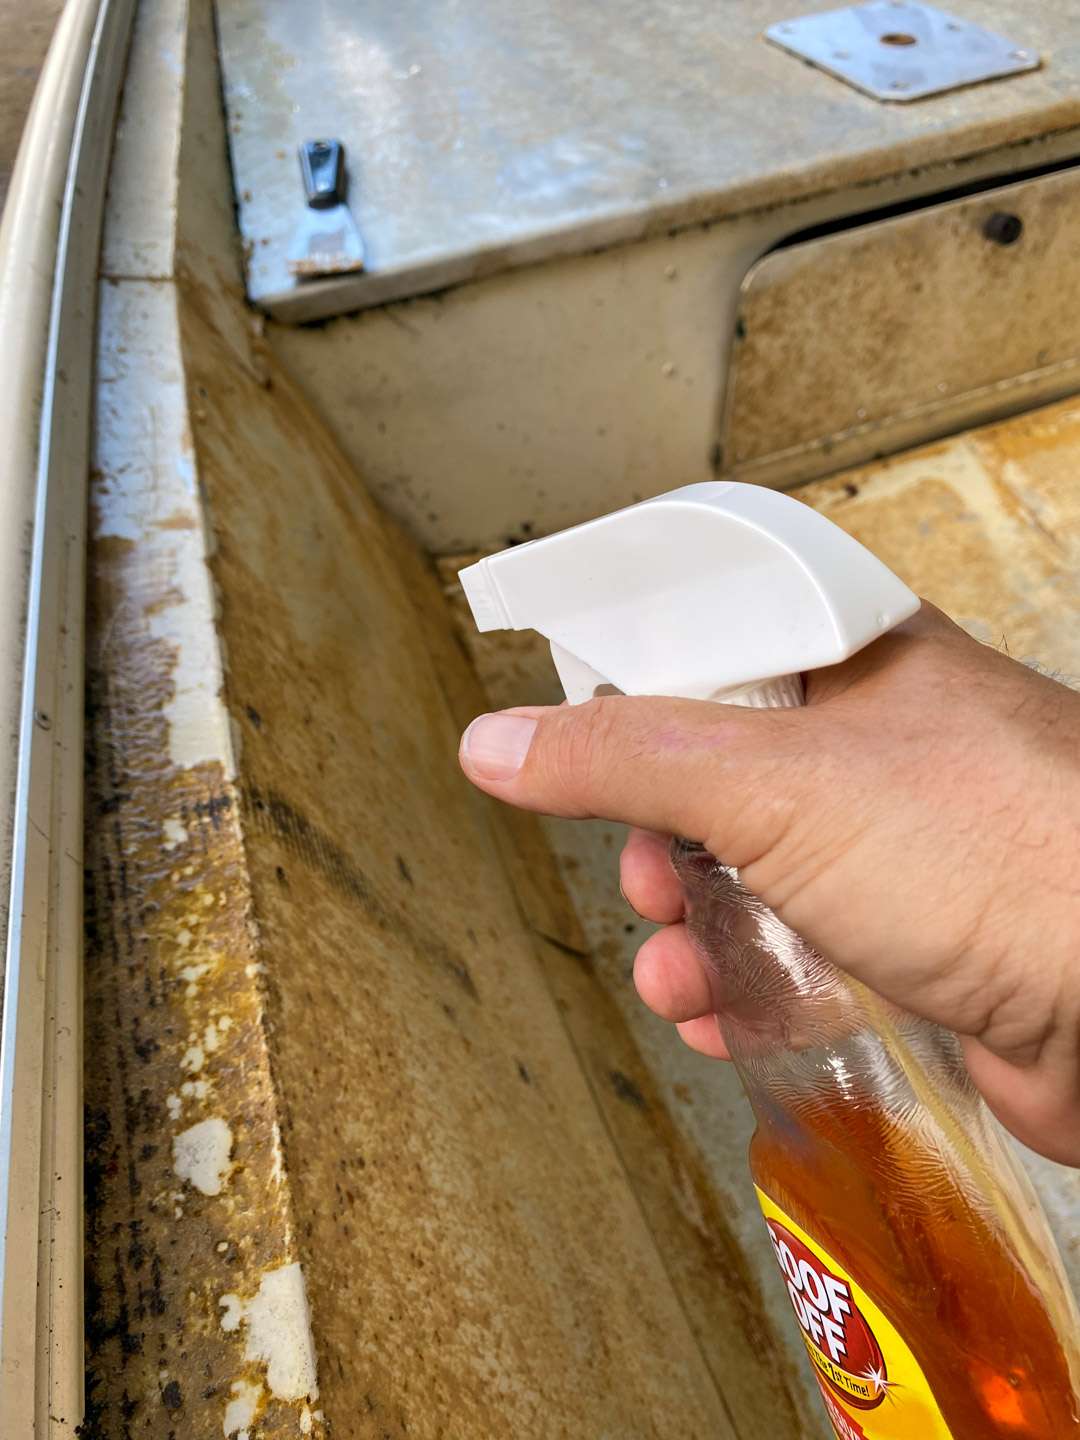 I first tried removing the glue using Goof Off and a scraper. This was good for the areas with really heavy glue residue. Be sure to wear a respiratorâ¦ this chemical is powerful.